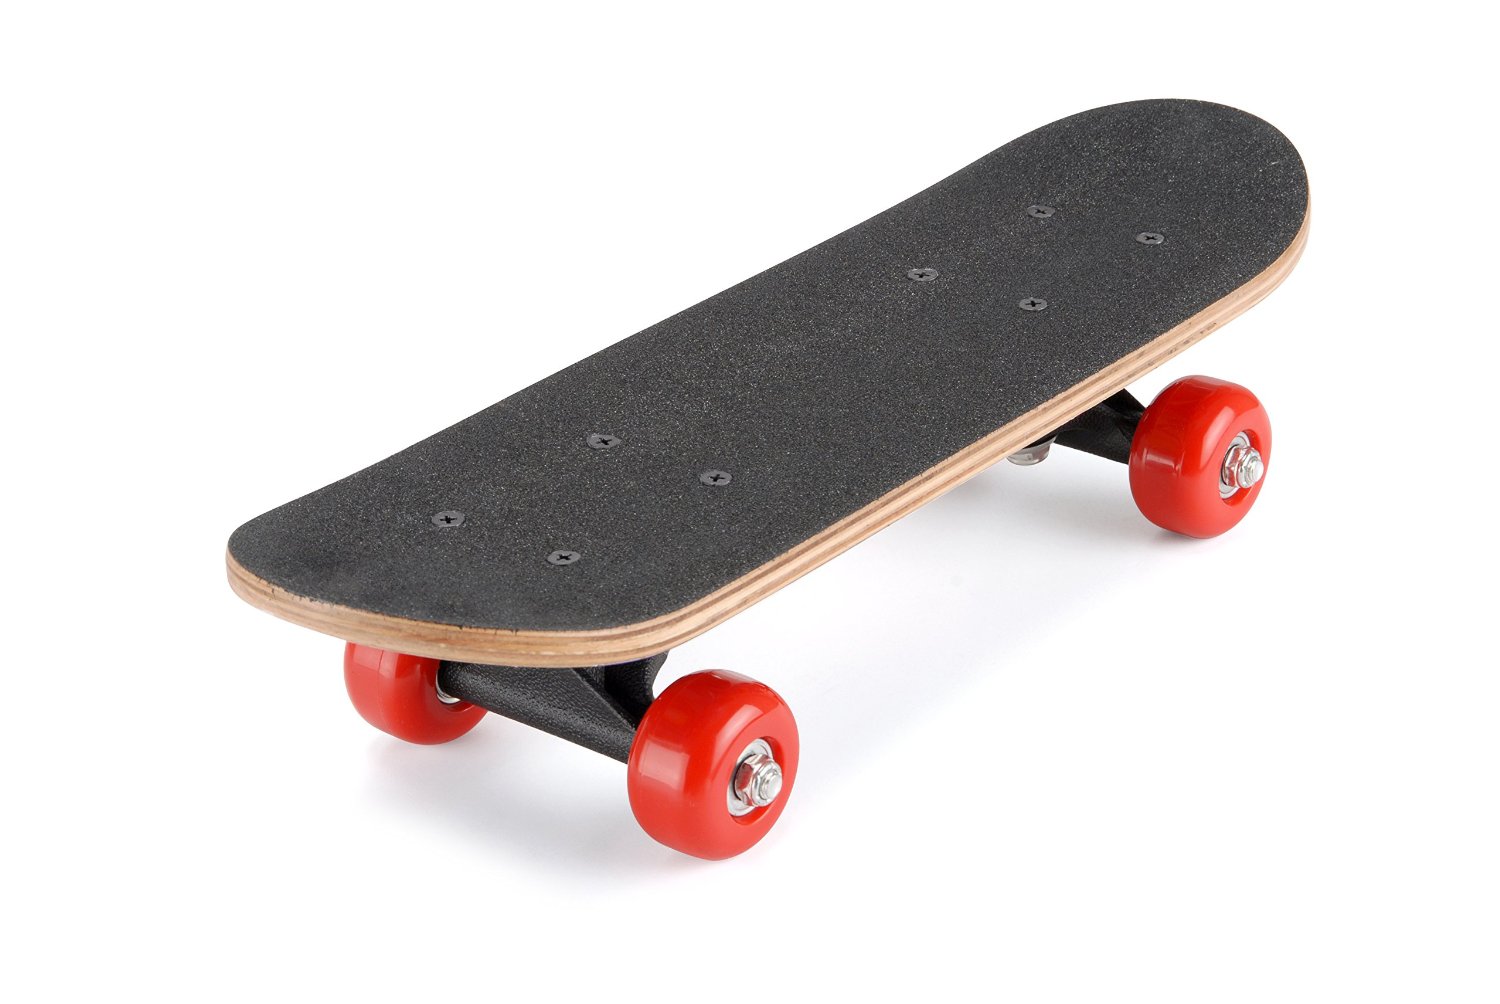 Skateboard Meaning and Definition